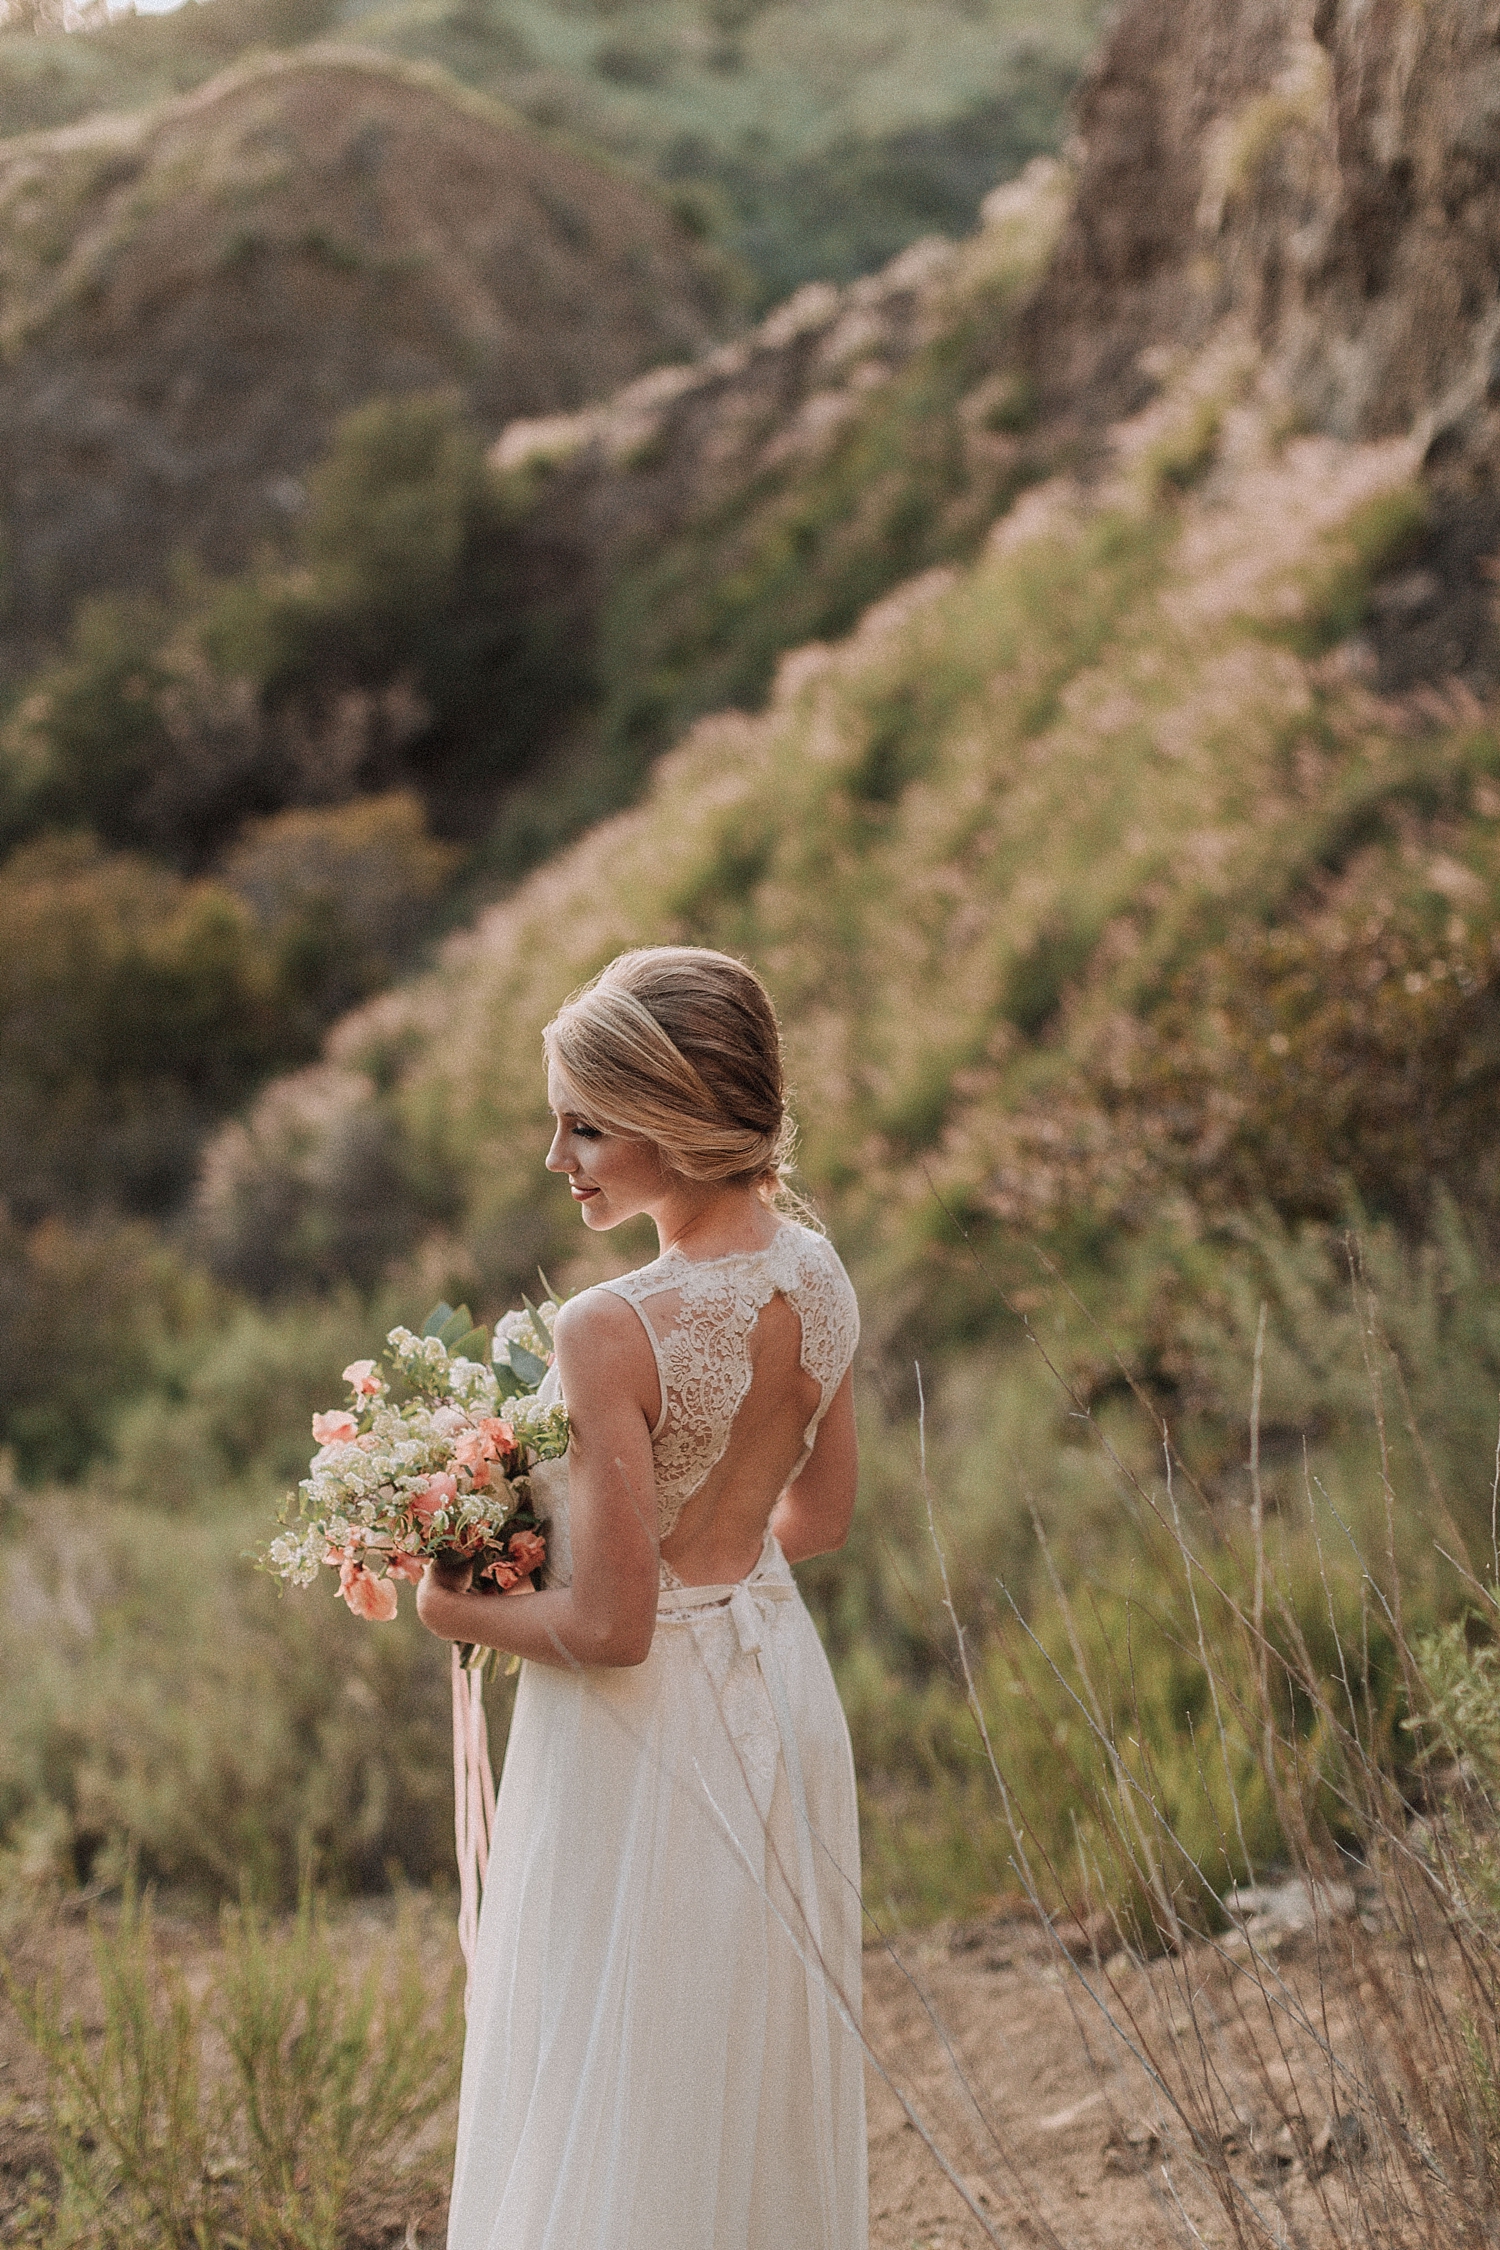 Los Angeles Elopement Photography Bronson Canyon